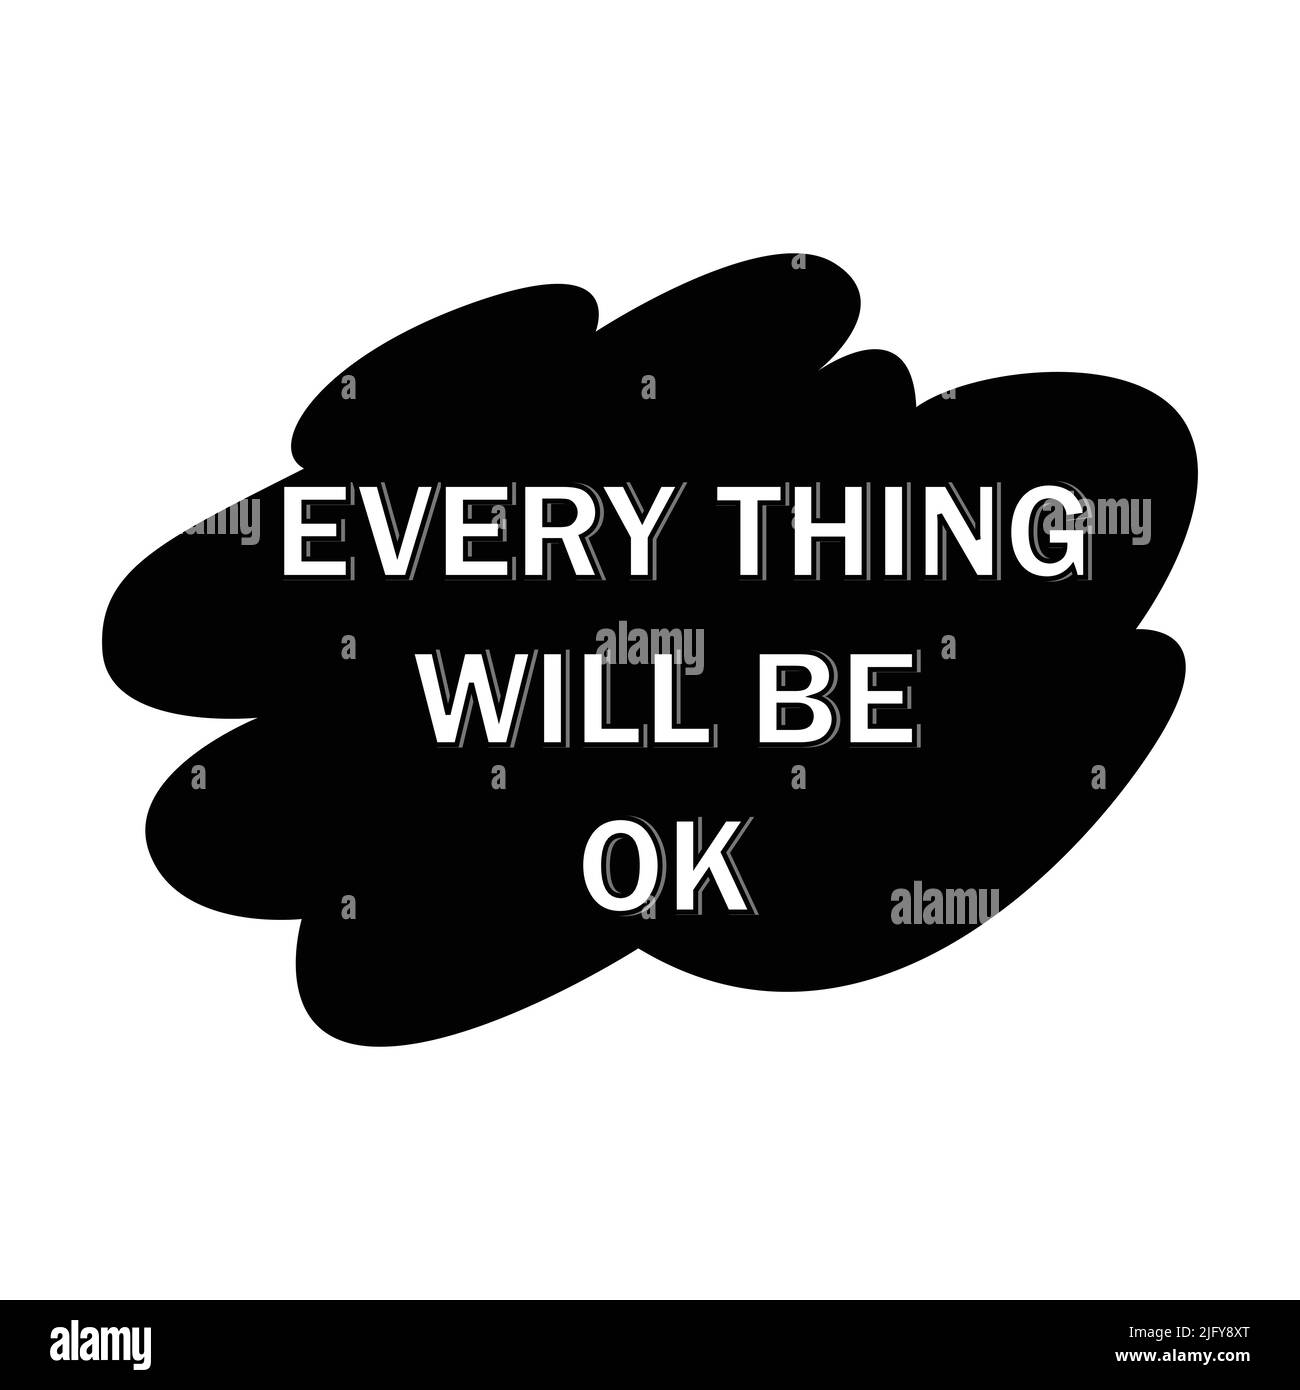 Everything will be ok. text positive motivational words with white background. Stock Vector